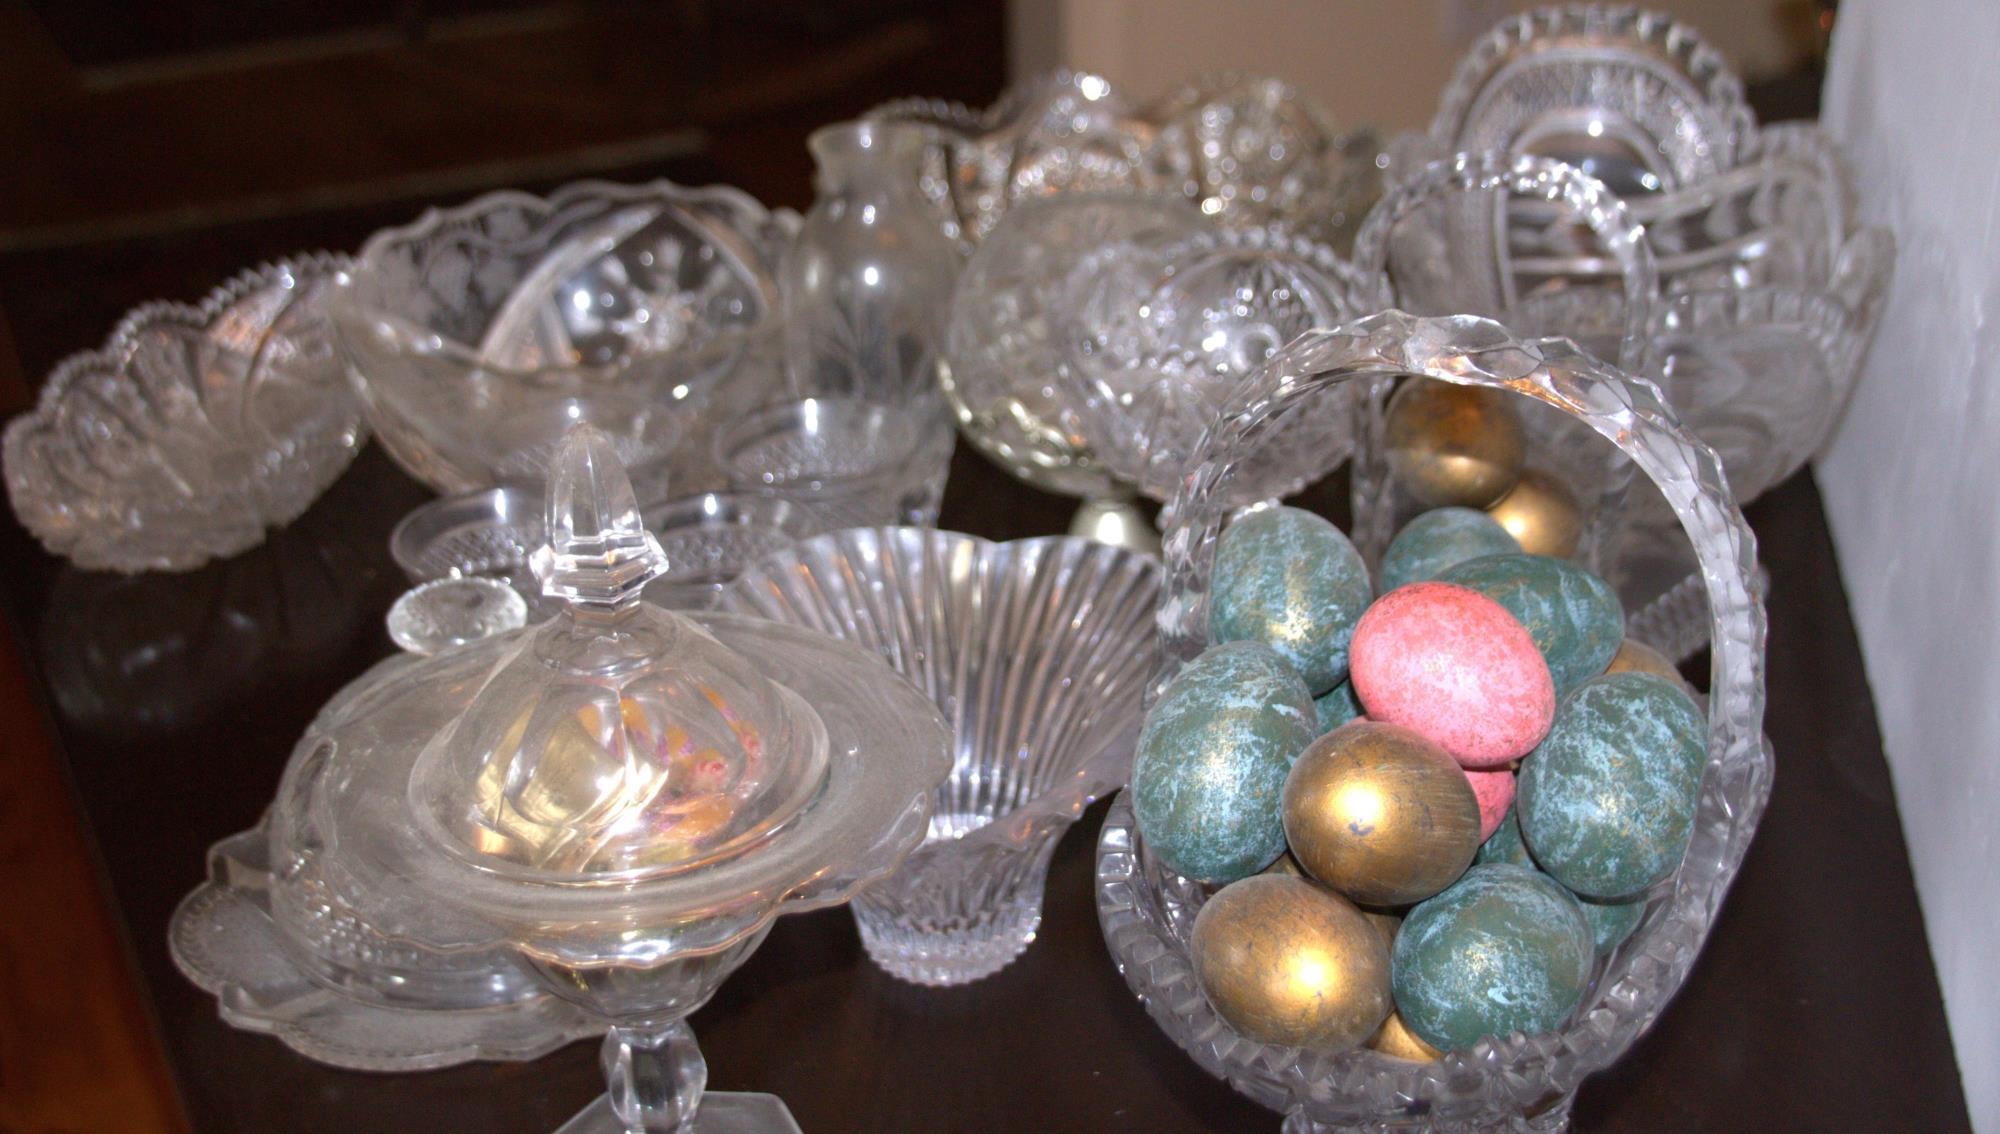 17 PIECES OF GLASS WITH PAINTED EGGS